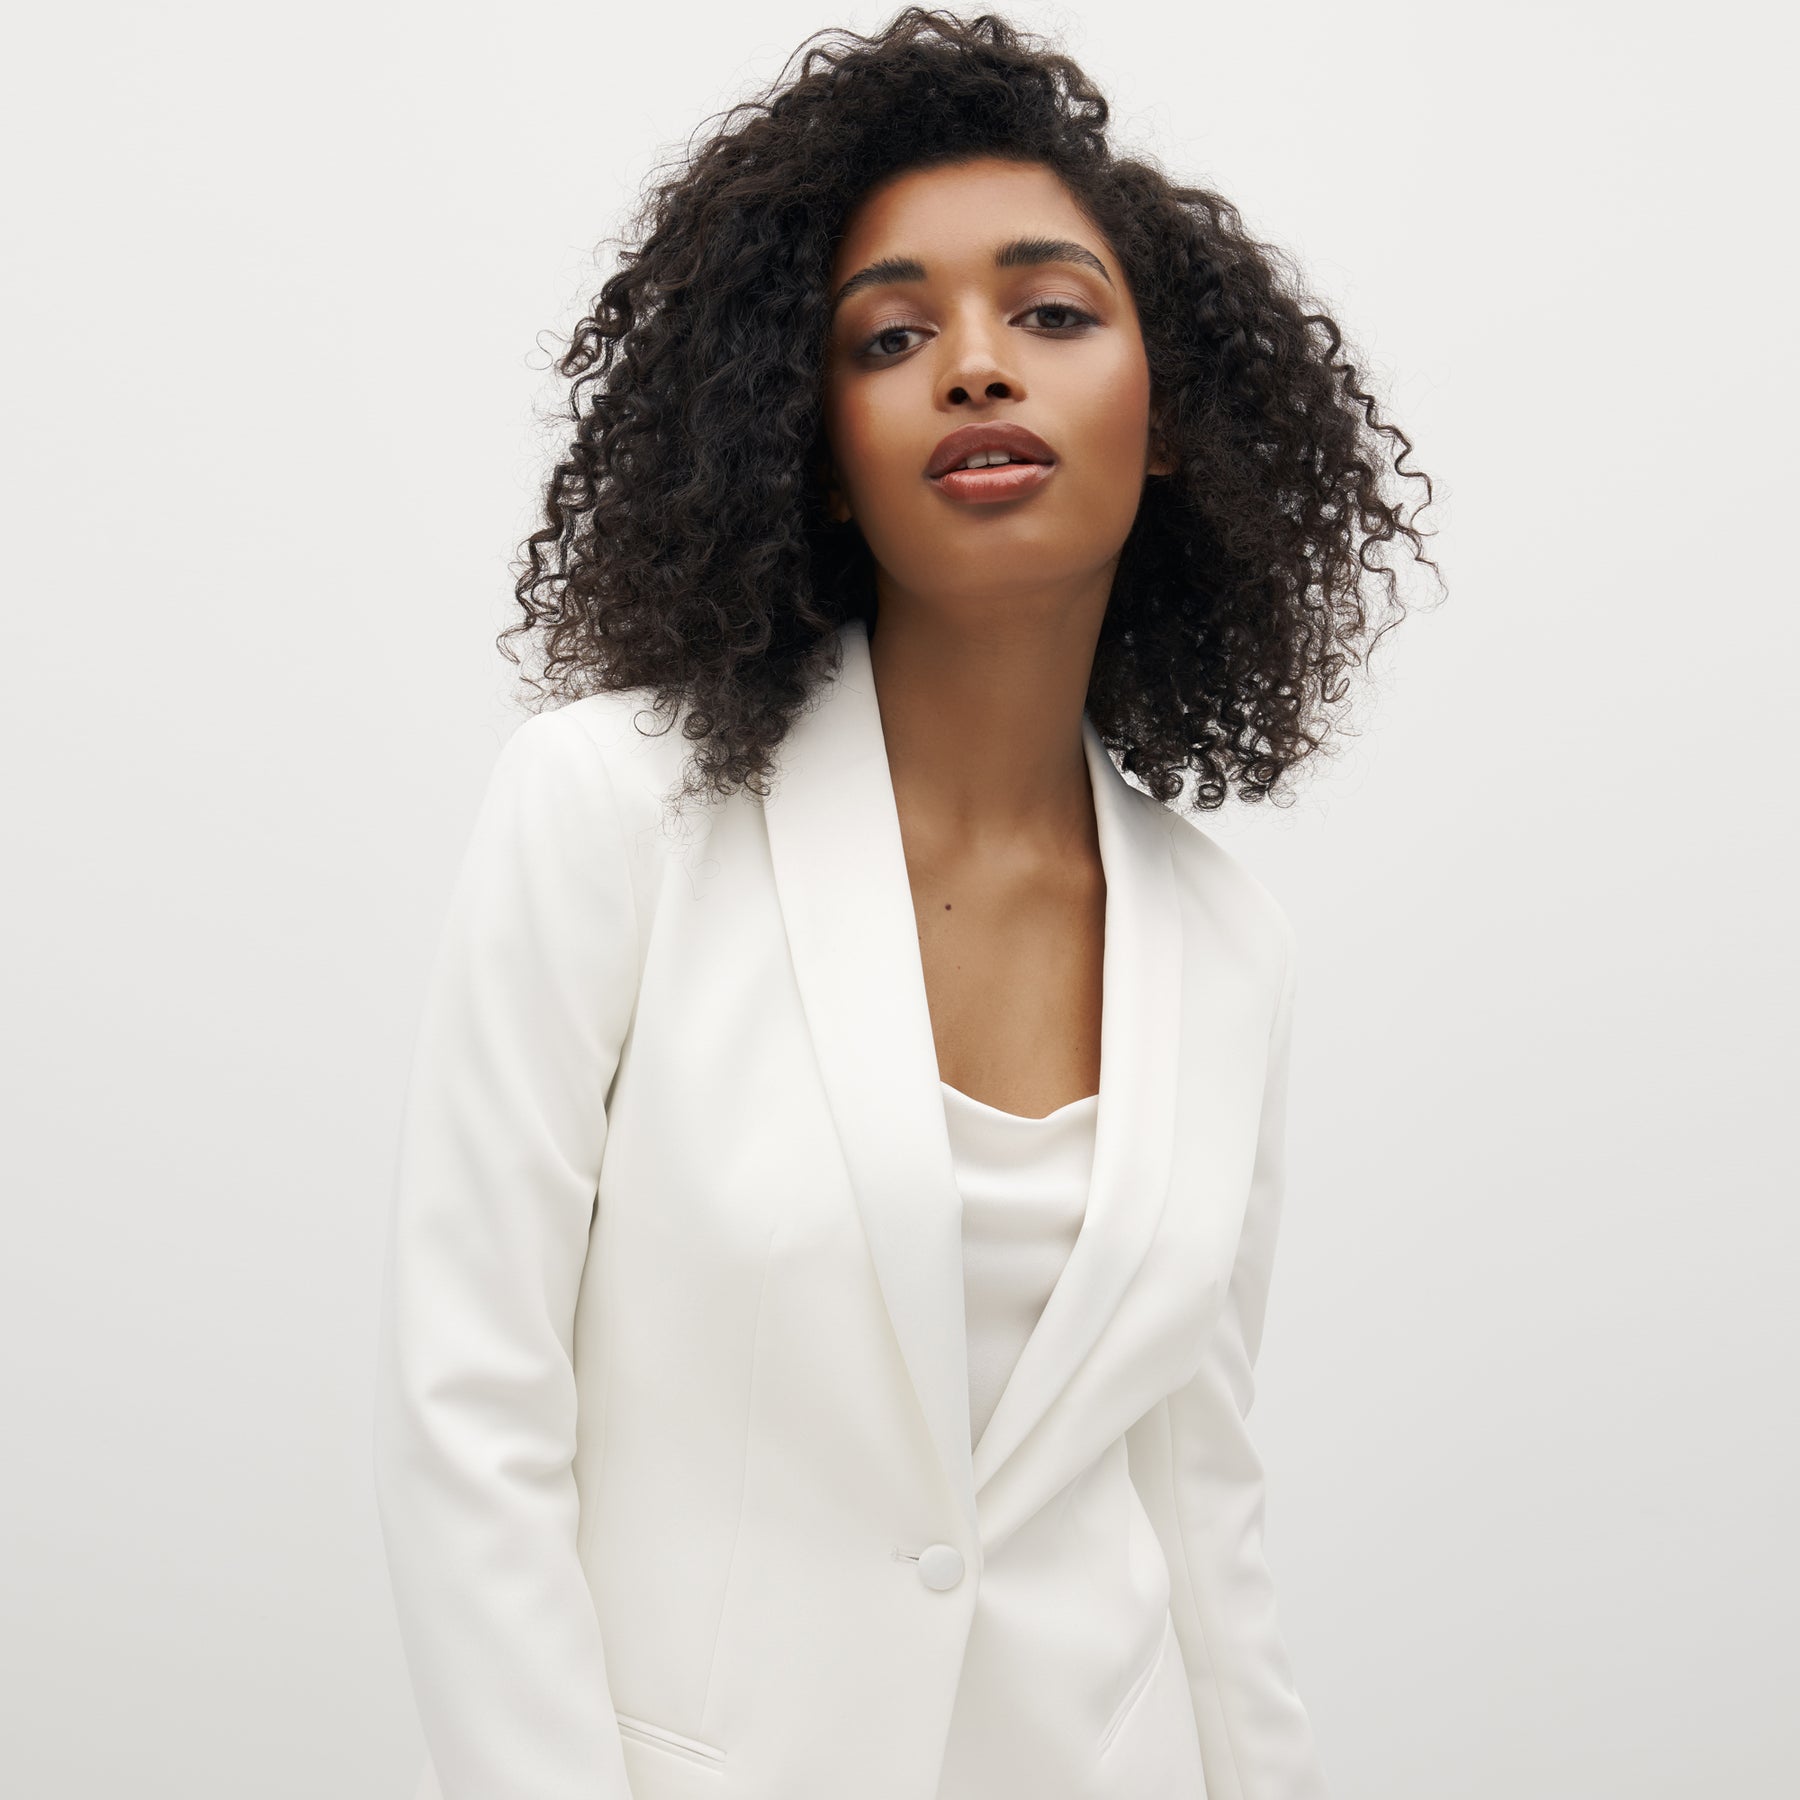 White Tuxedo Jacket for Women | Suits for Weddings & Events